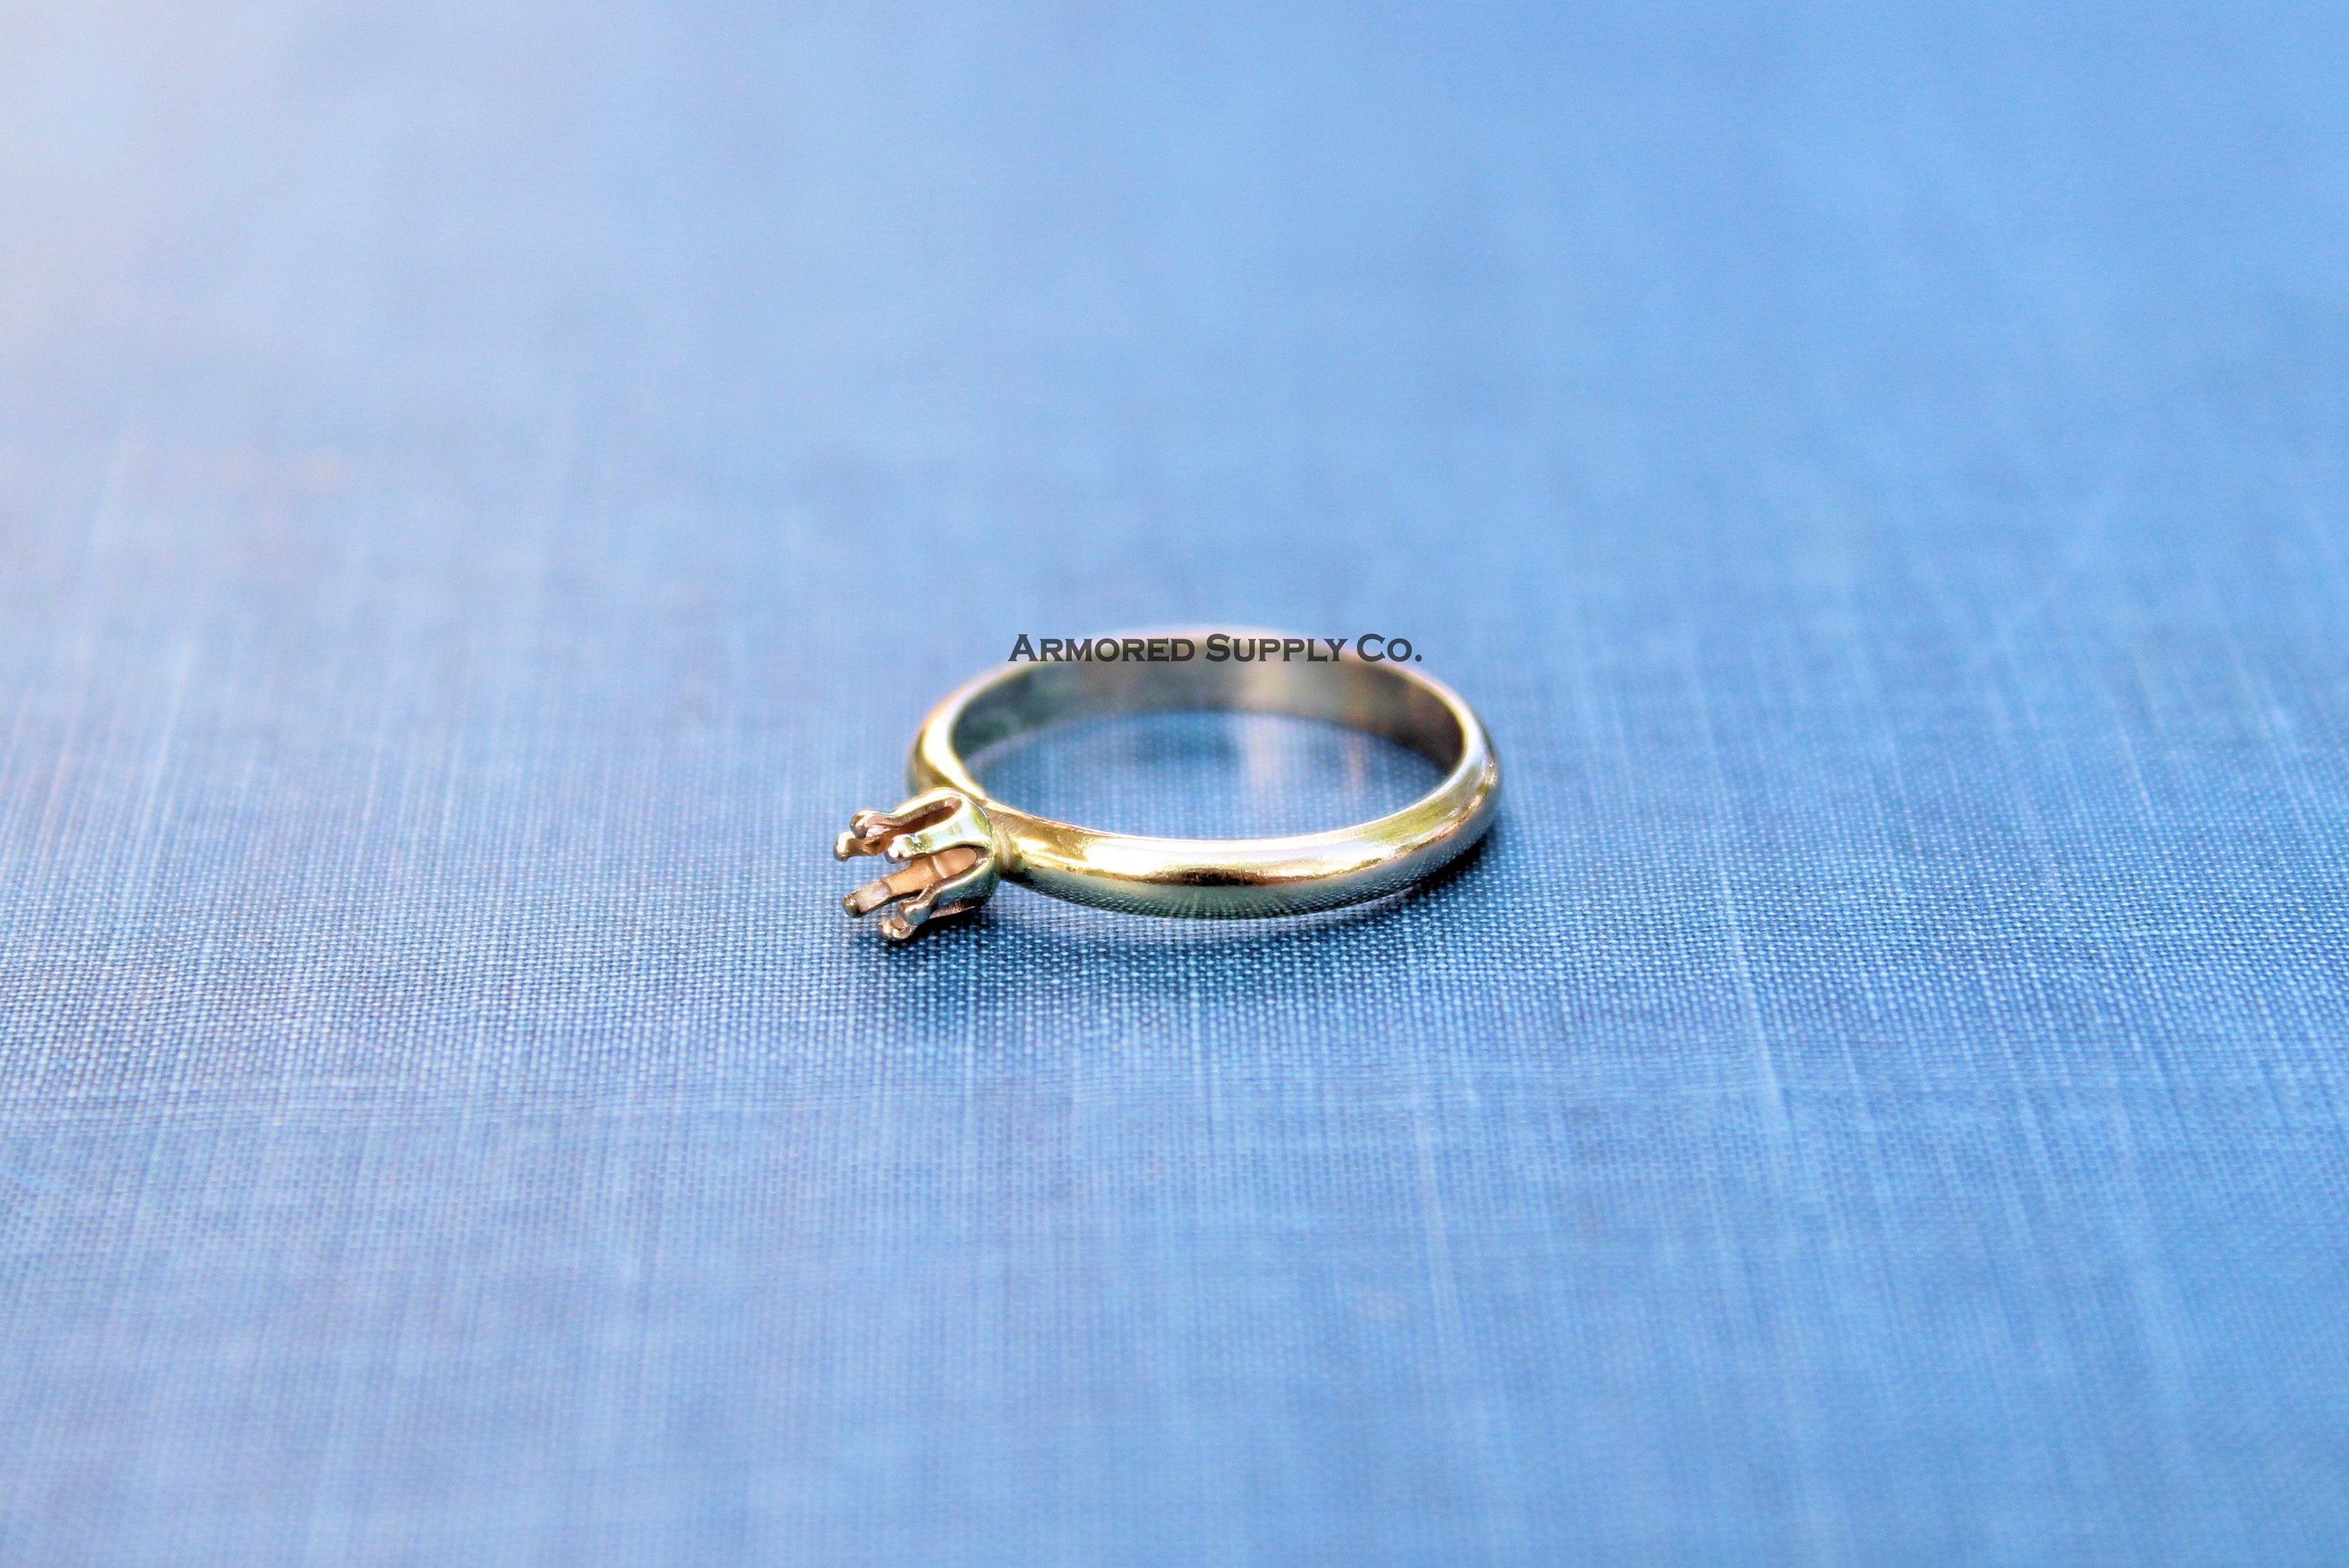 Gold Filled 6mm Snap In Bezel Ring blank,Half Round Ring Band, Breast Milk DIY ring, DIY jewelry supplies, wholesale jewelry, diy ring blank